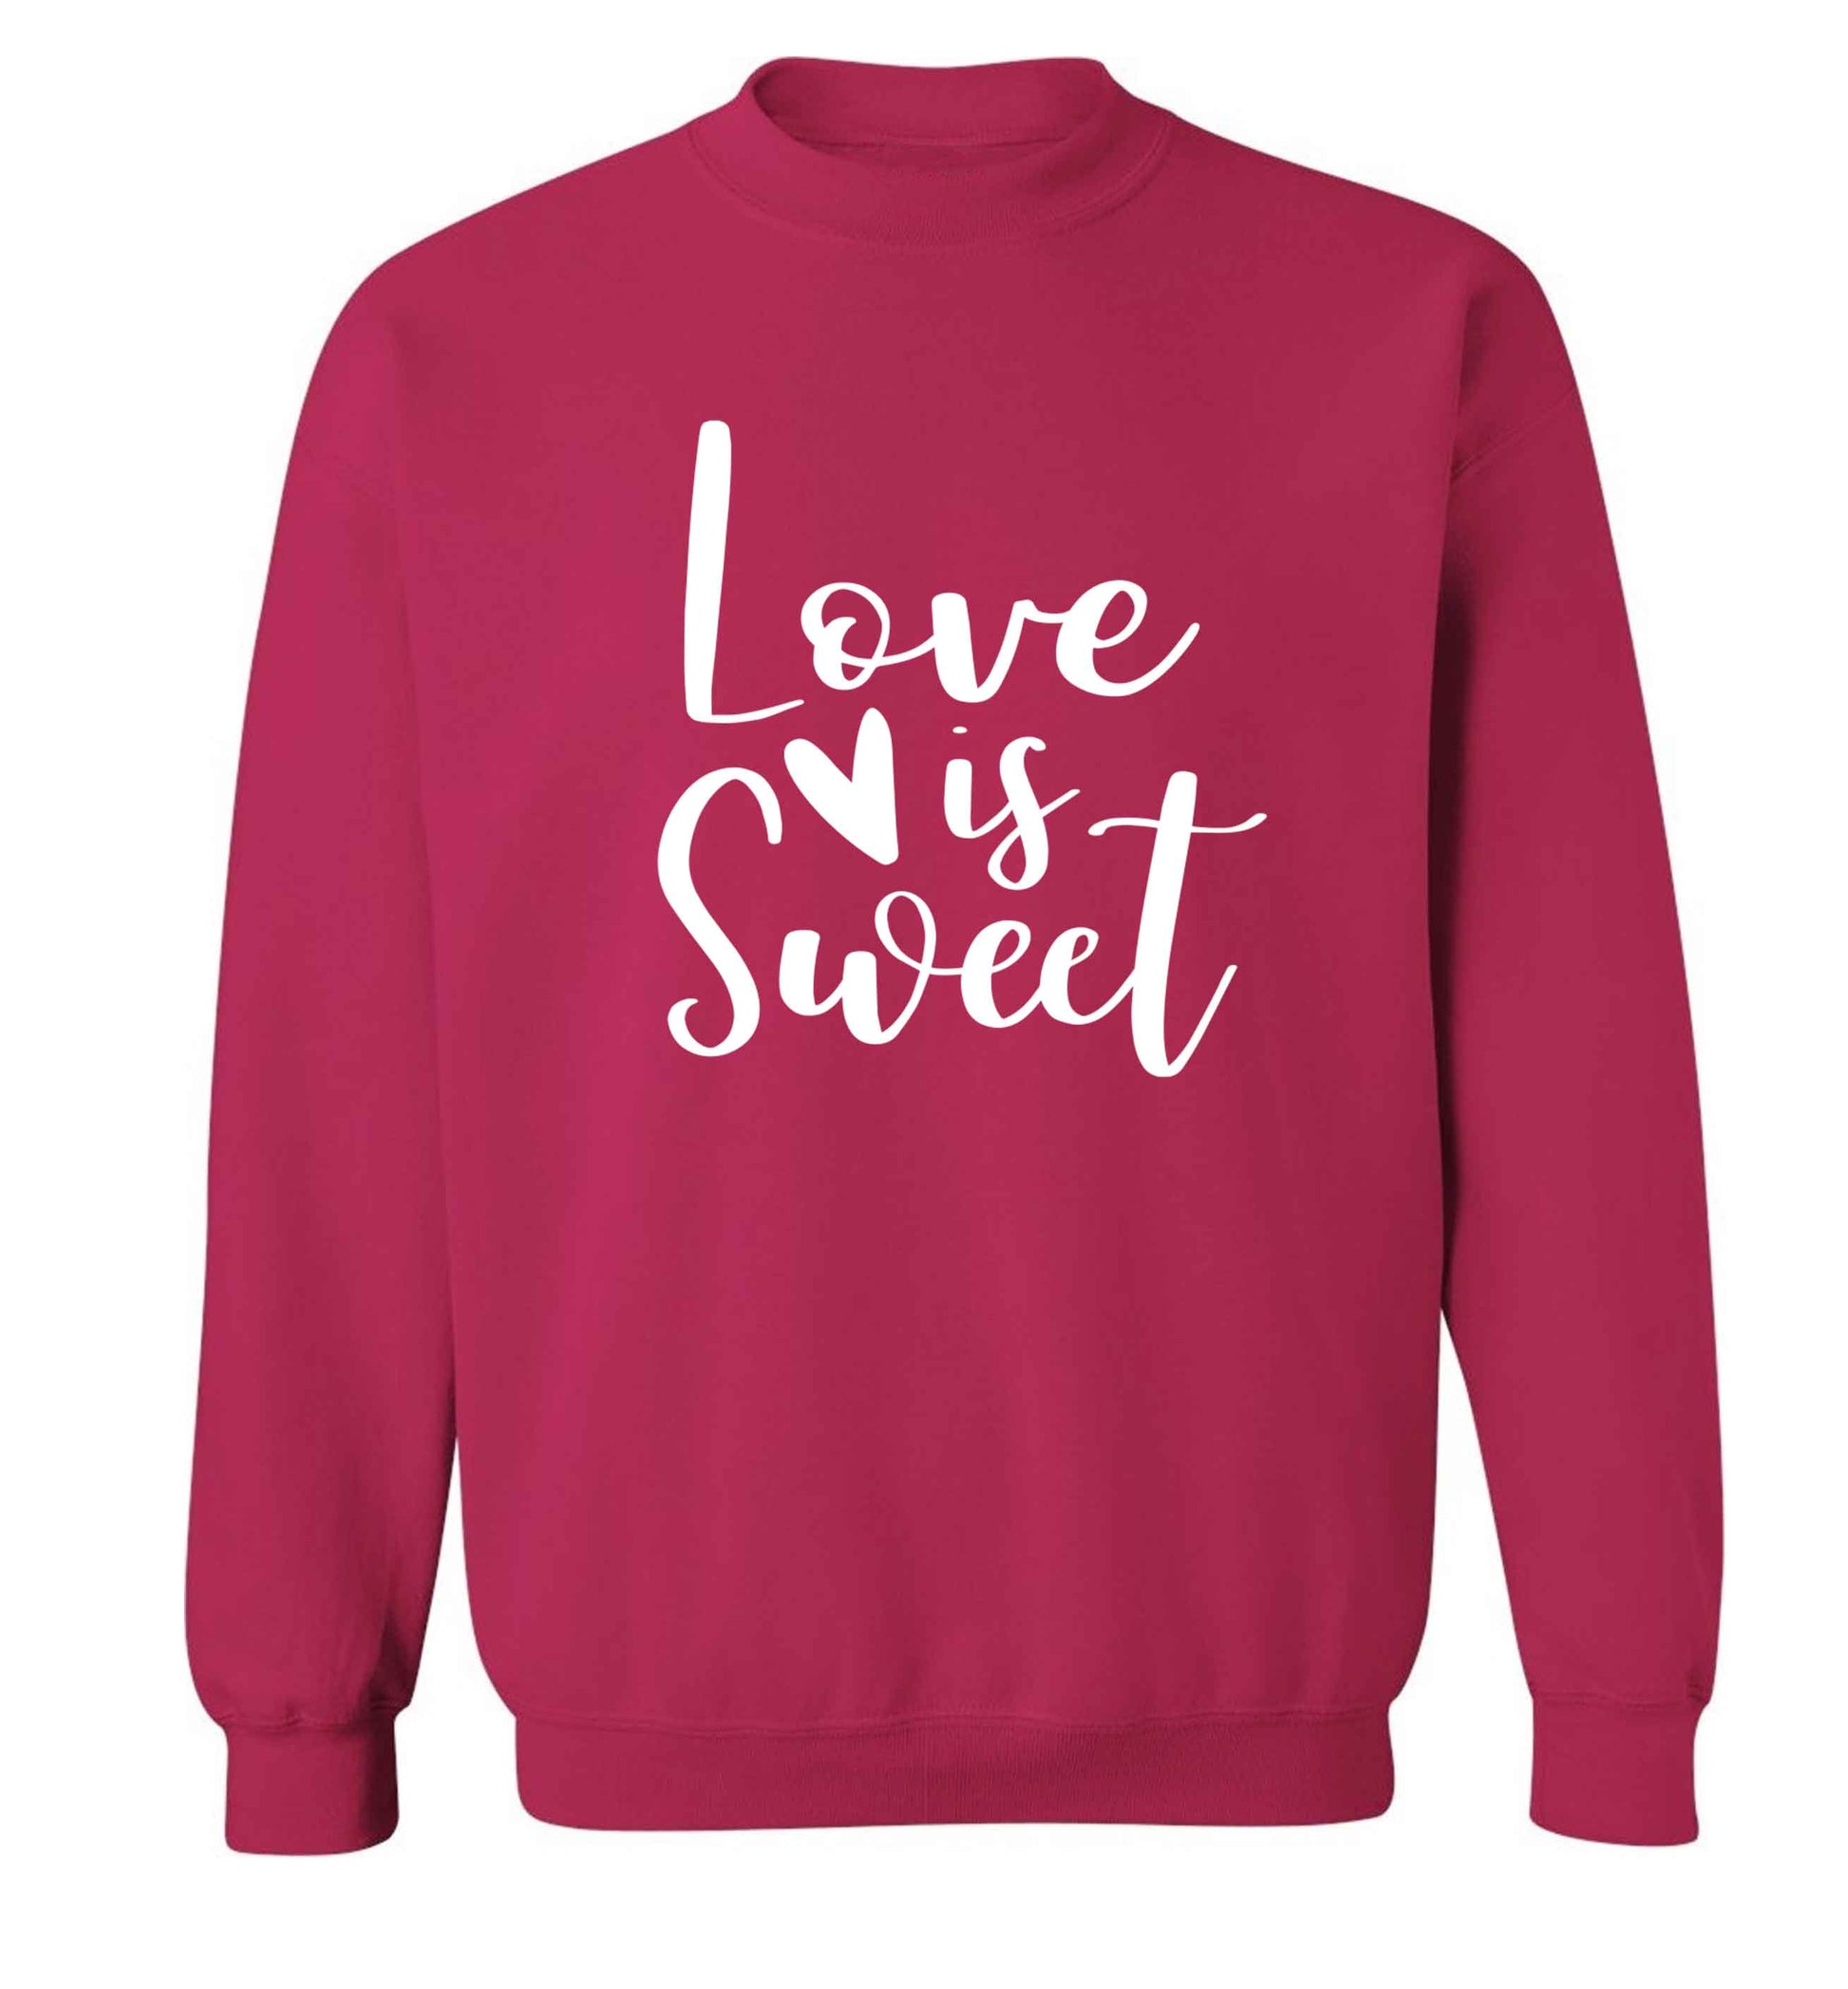 Love really does make the world go round! Ideal for weddings, valentines or just simply to show someone you love them!  adult's unisex pink sweater 2XL